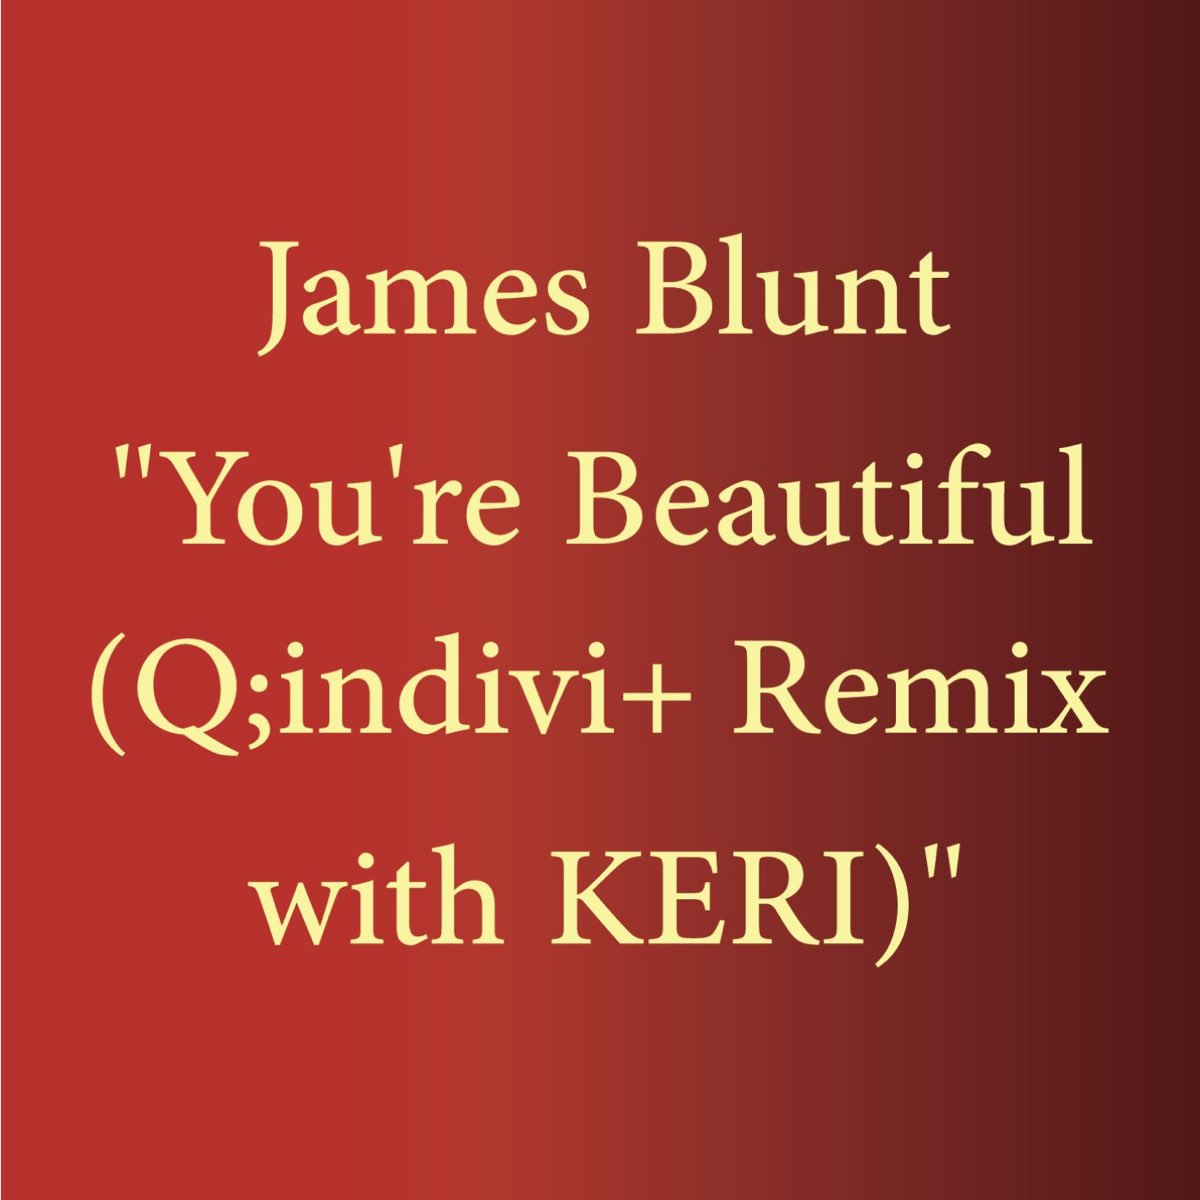 You're Beautiful (Q;indivi+ Remix with KERI) - Single by James Blunt on  Apple Music